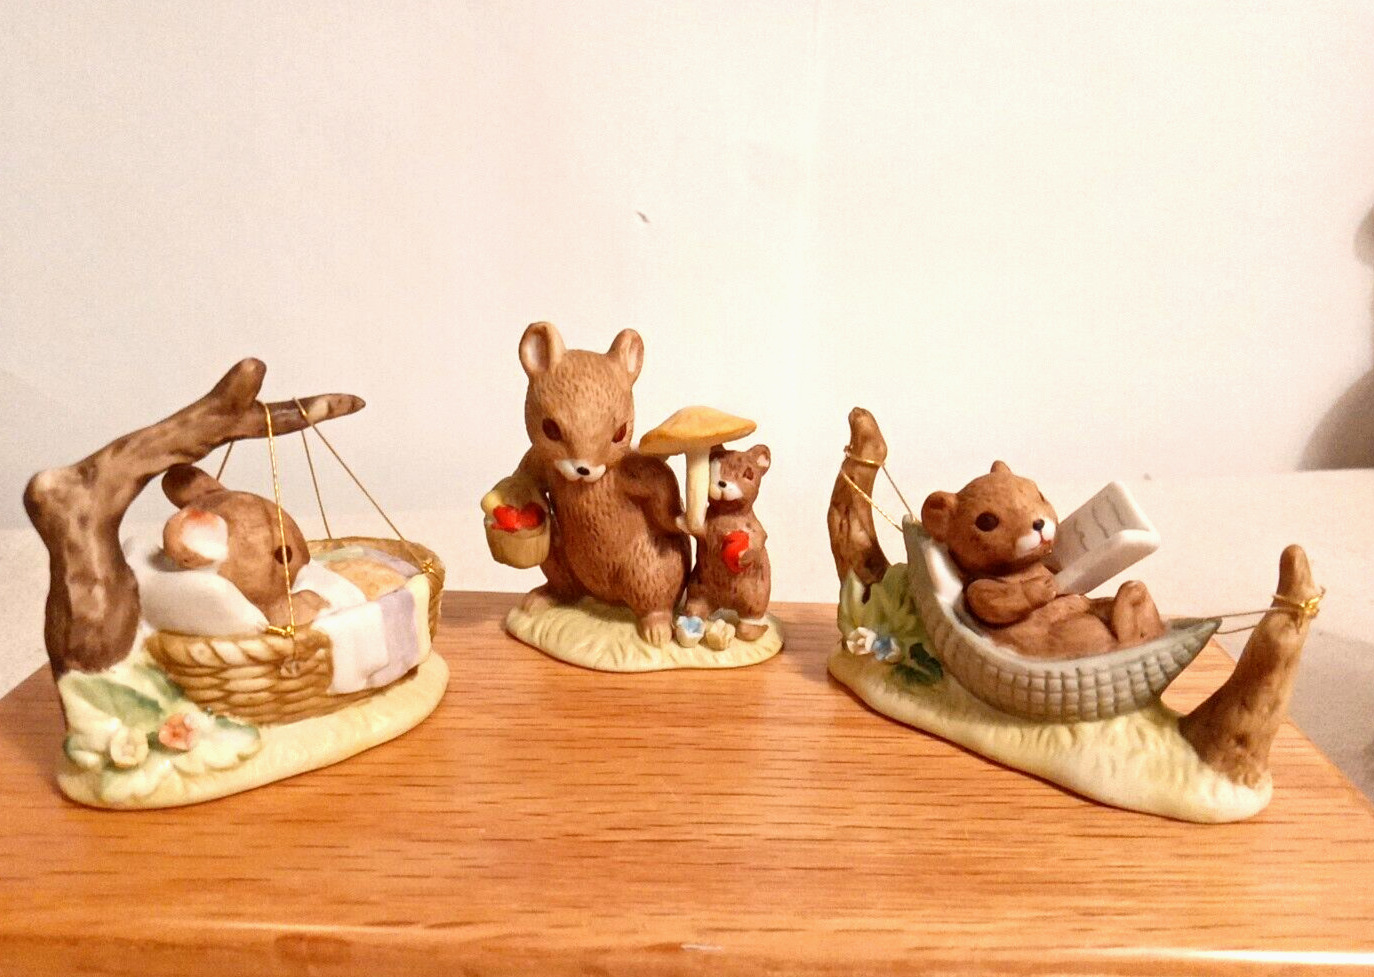 Vintage Enesco Set of 3 Dated 1975 Mice Figurines E-5952 With Foiled Sticker